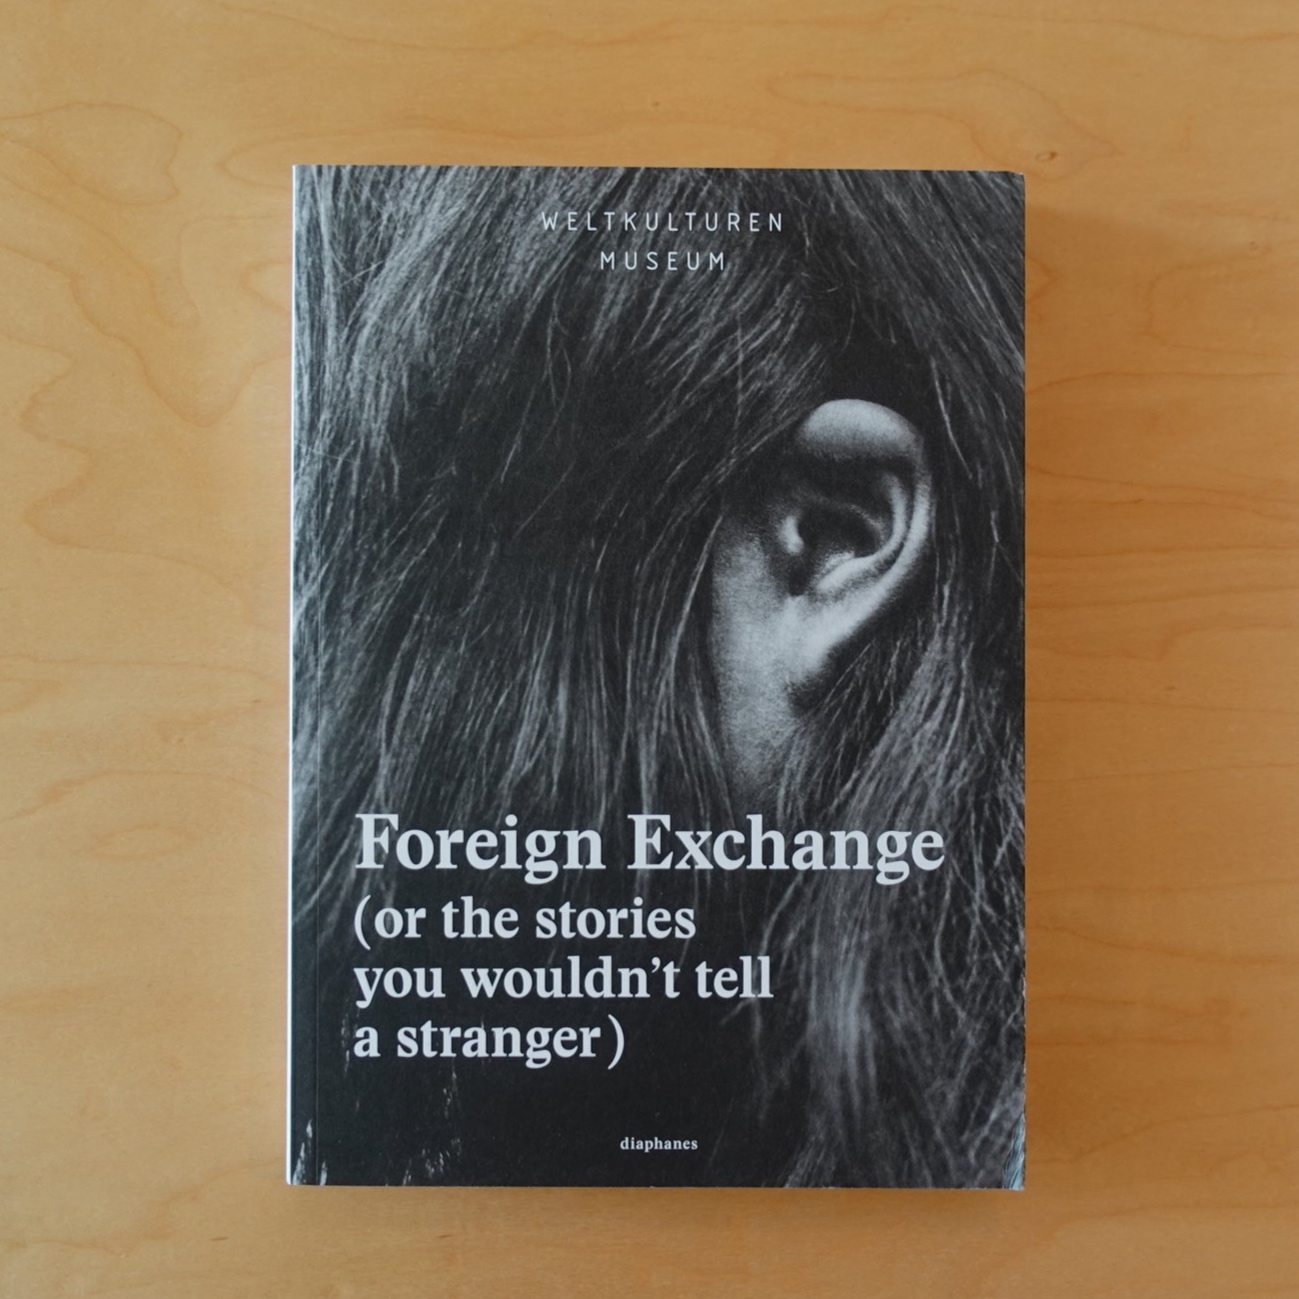 Foreign Exchange (or the stories you wouldn’t tell a stranger)